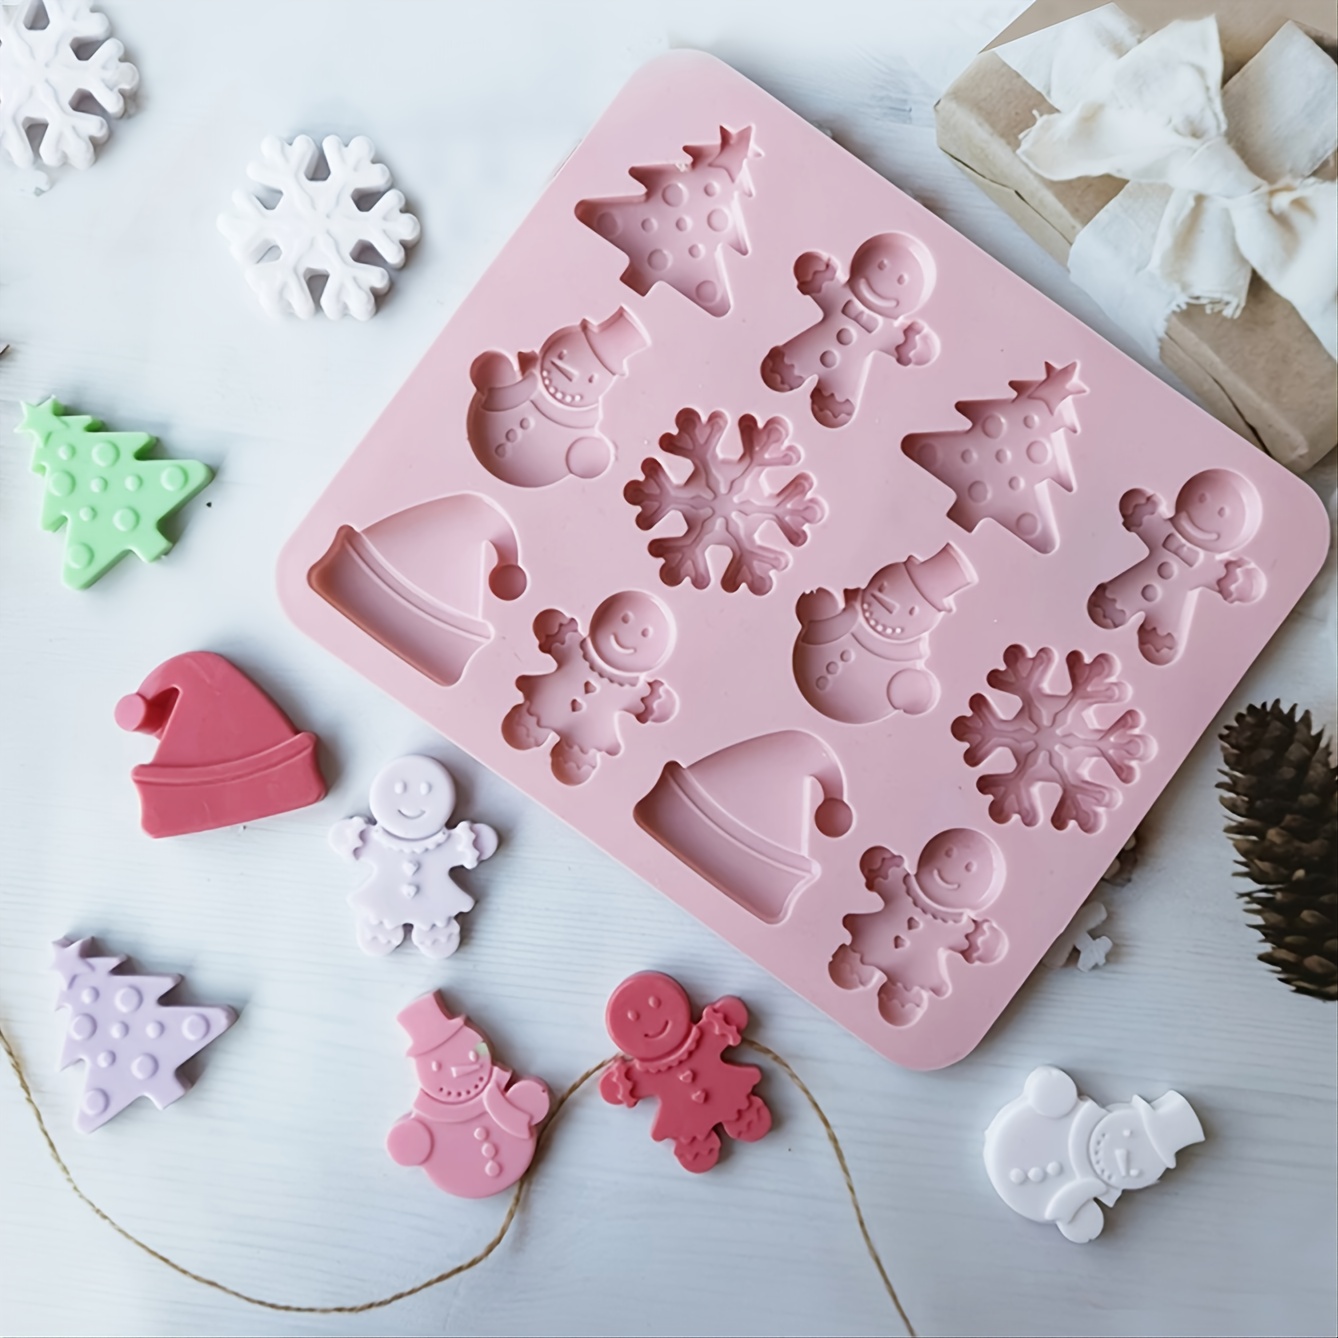 3D Christmas Snowflake Silicone molds Soap Mold Chocolate Mold DIY Fondant  Baking Cooking Cake Decorating Tools